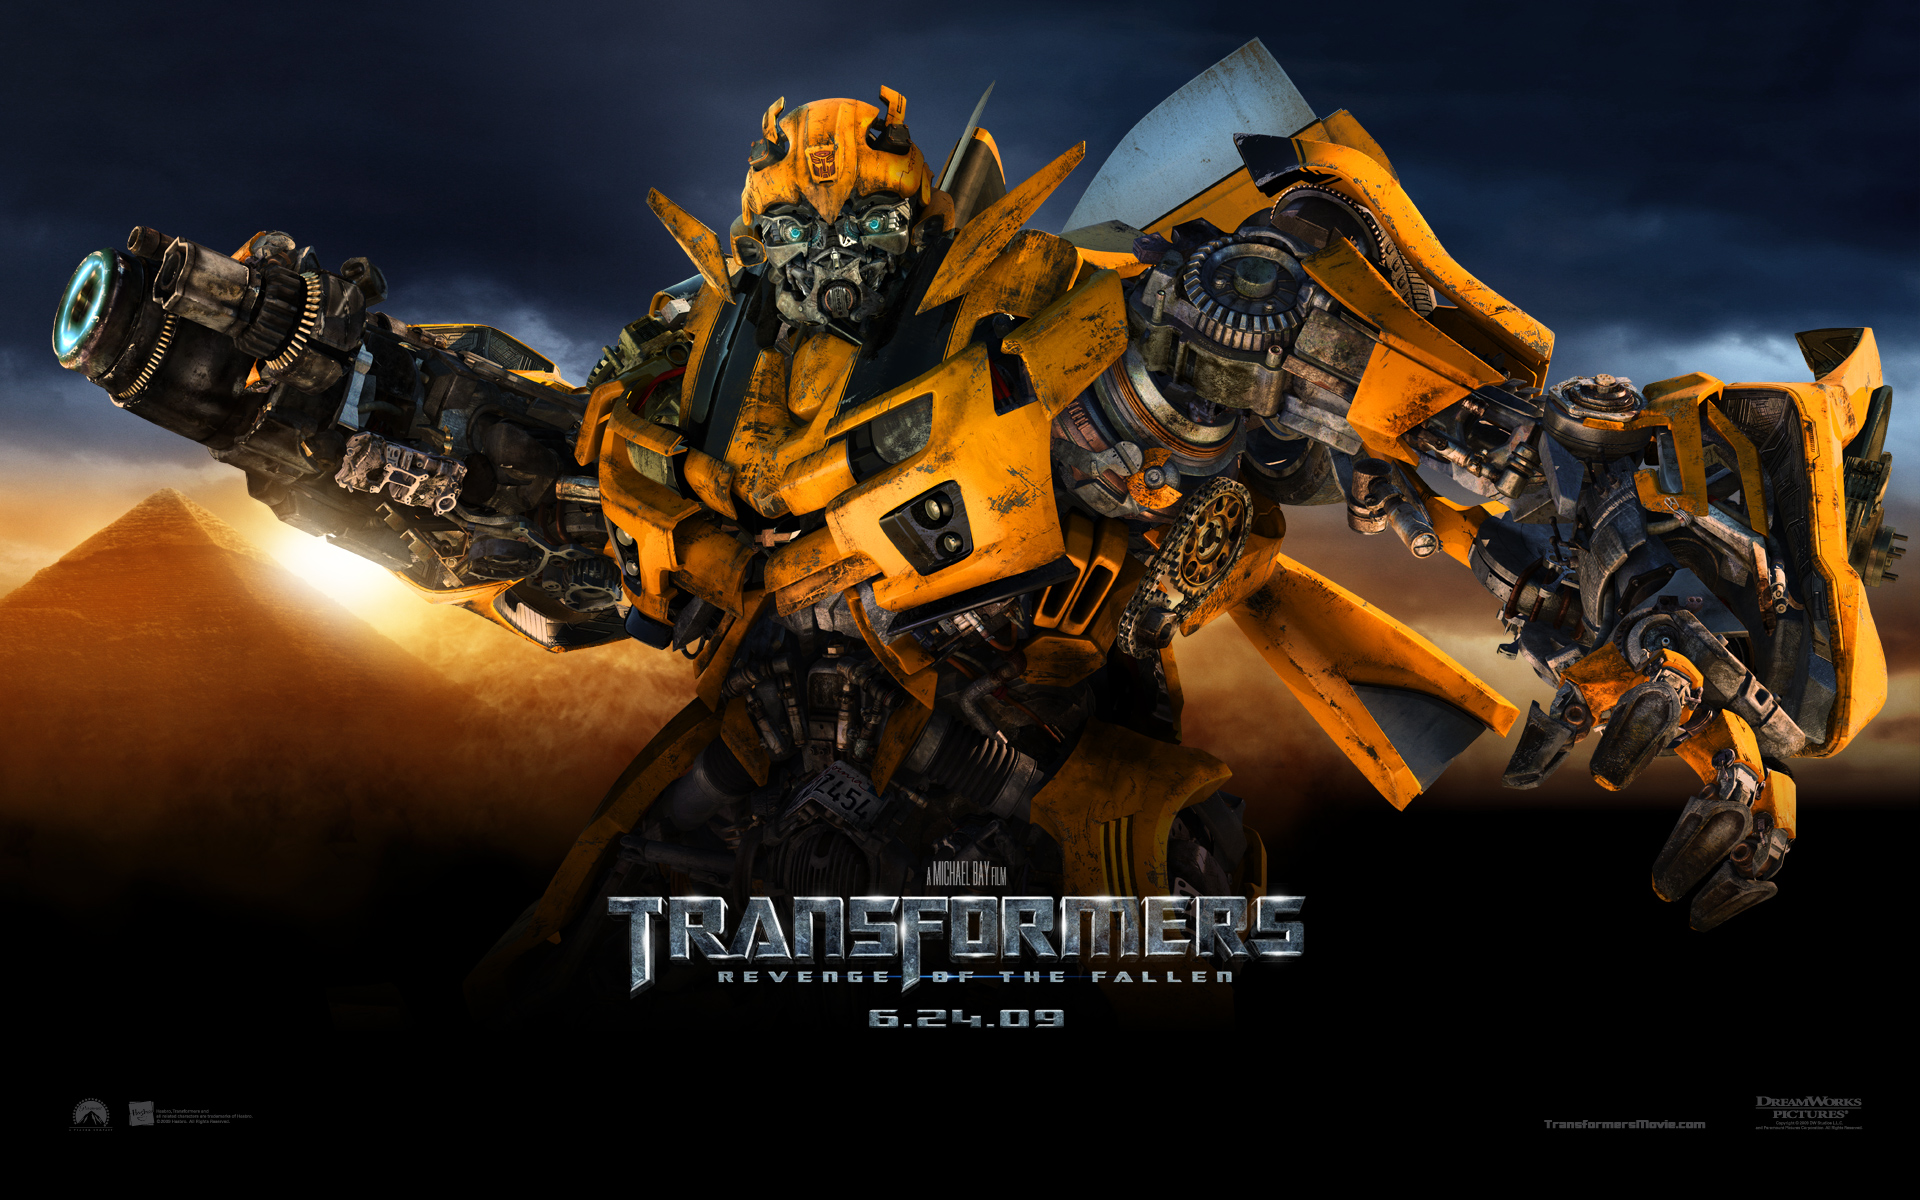 Transformers Wallpaper That I Have Missed Be Sure To Link It In The